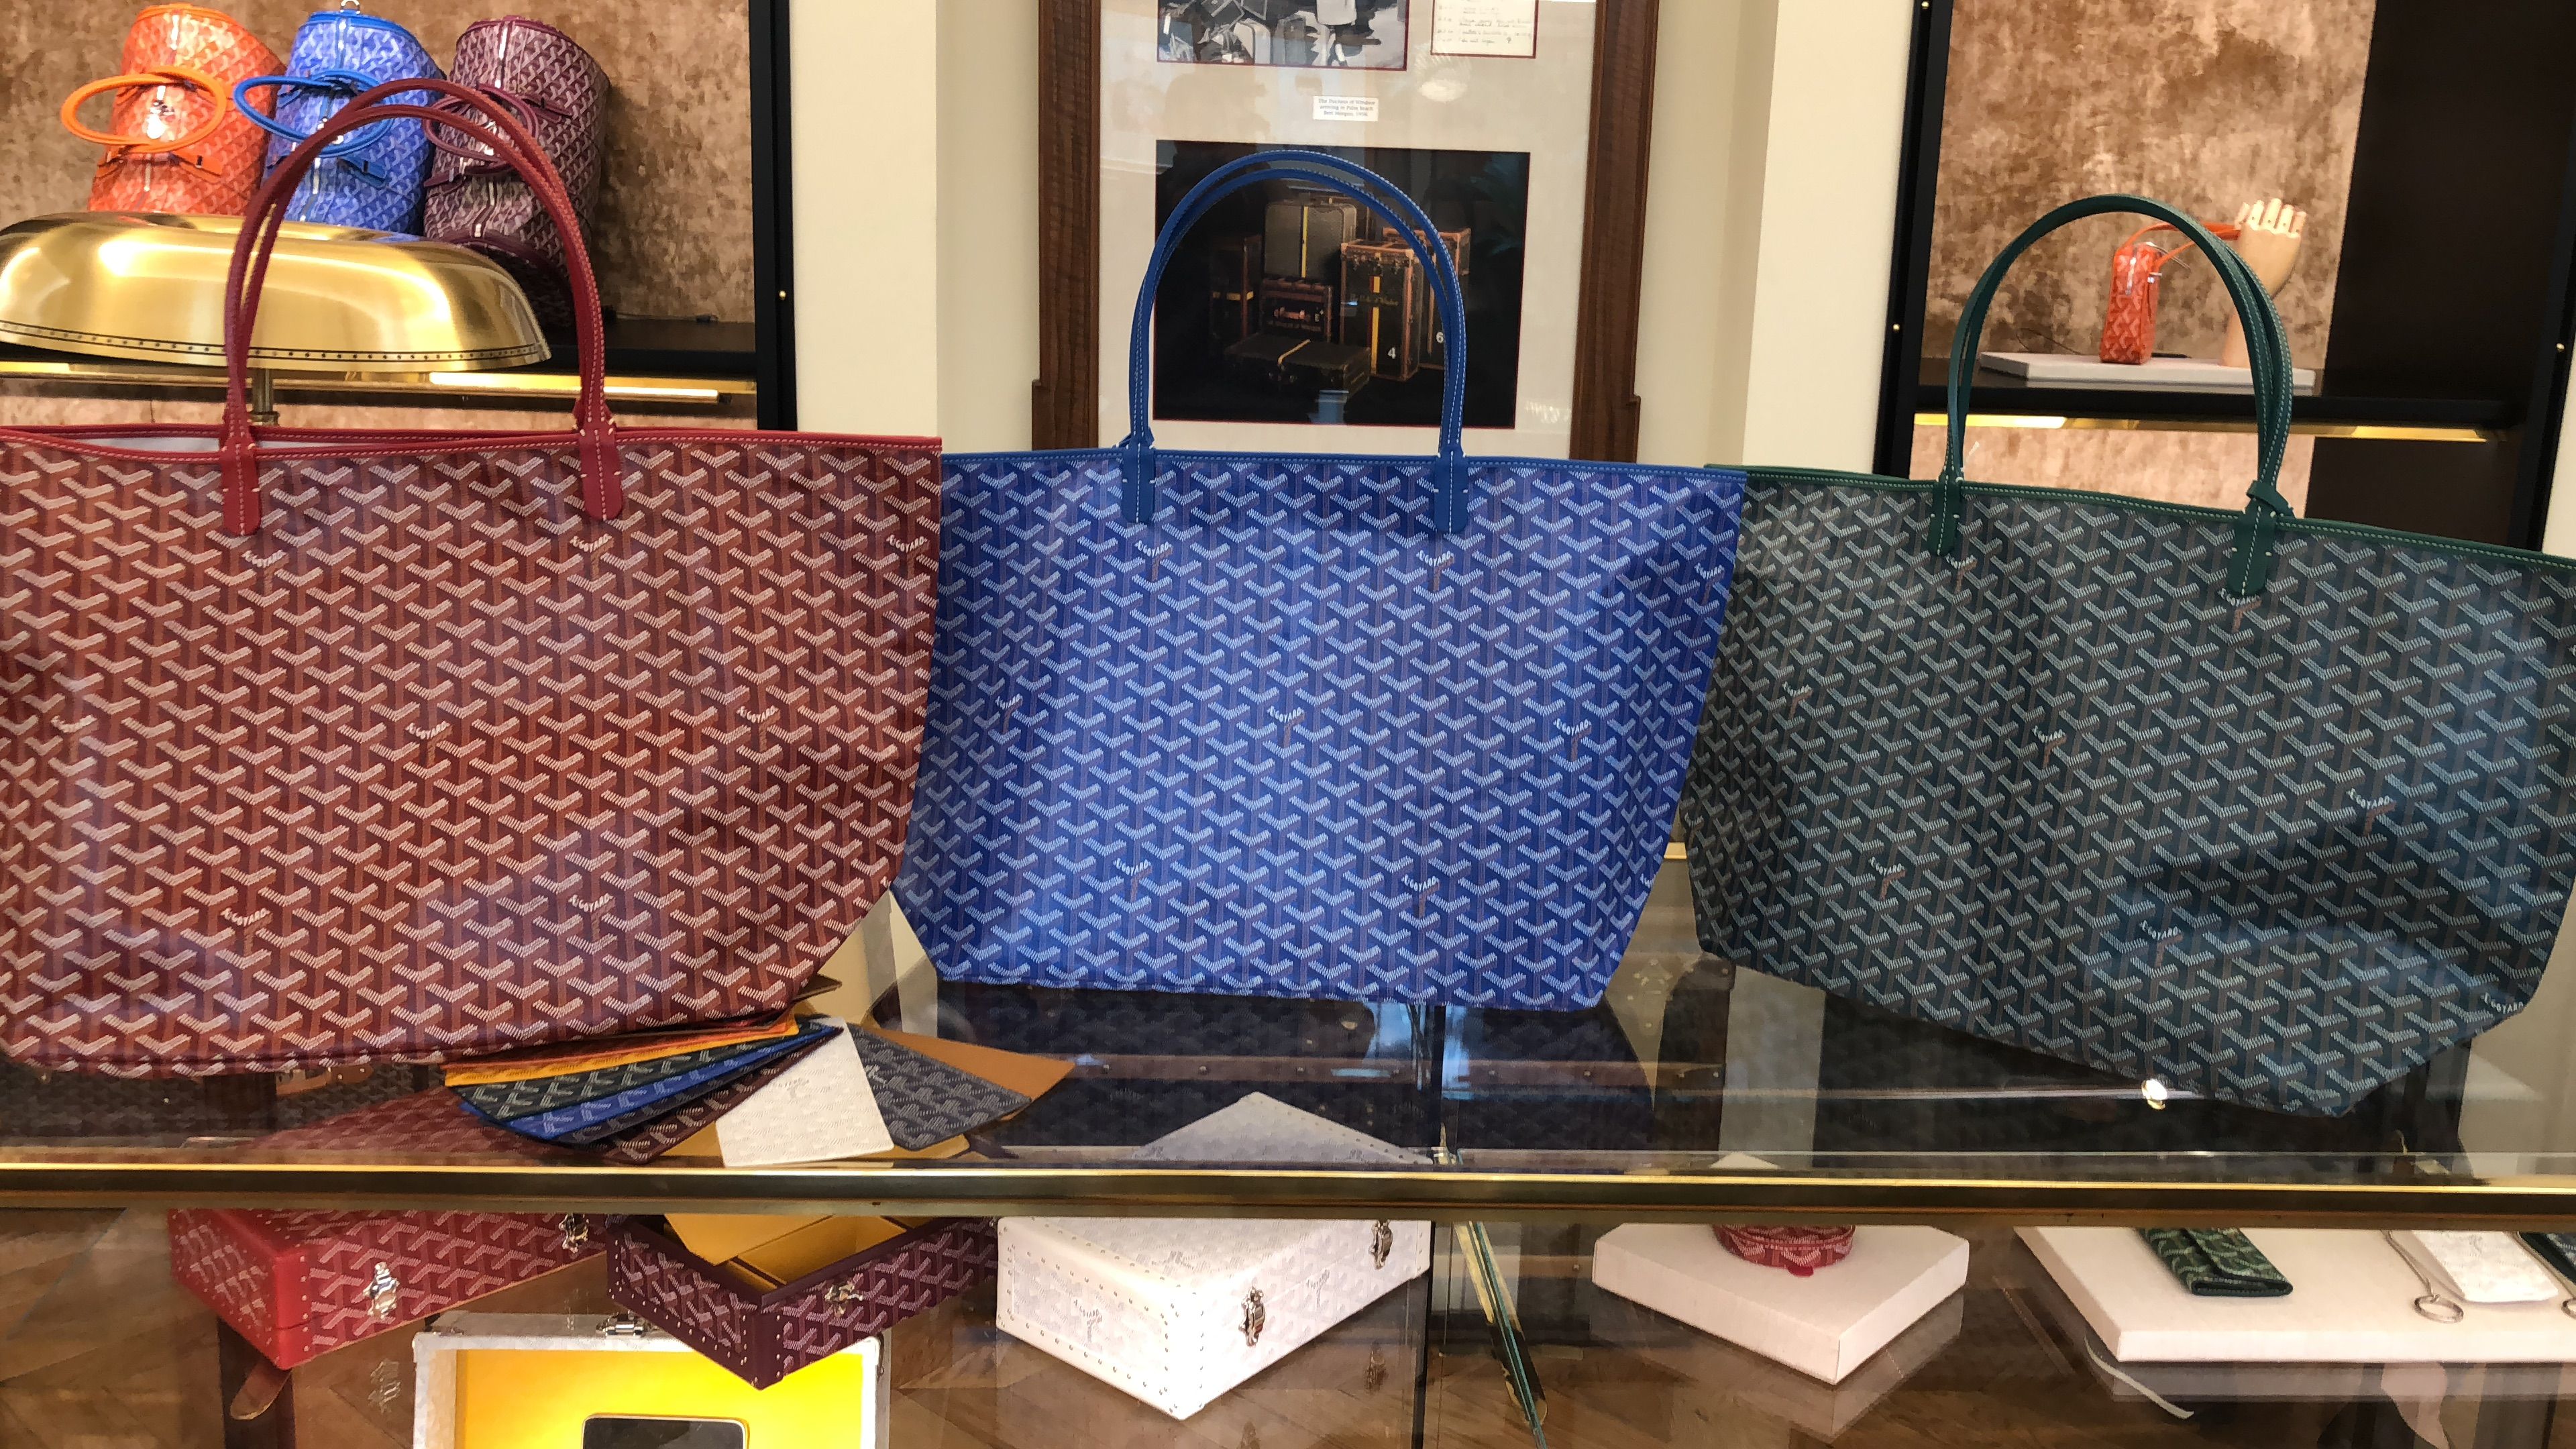 Maison Goyard - The Anjou bag comes in two sizes (PM or GM) and